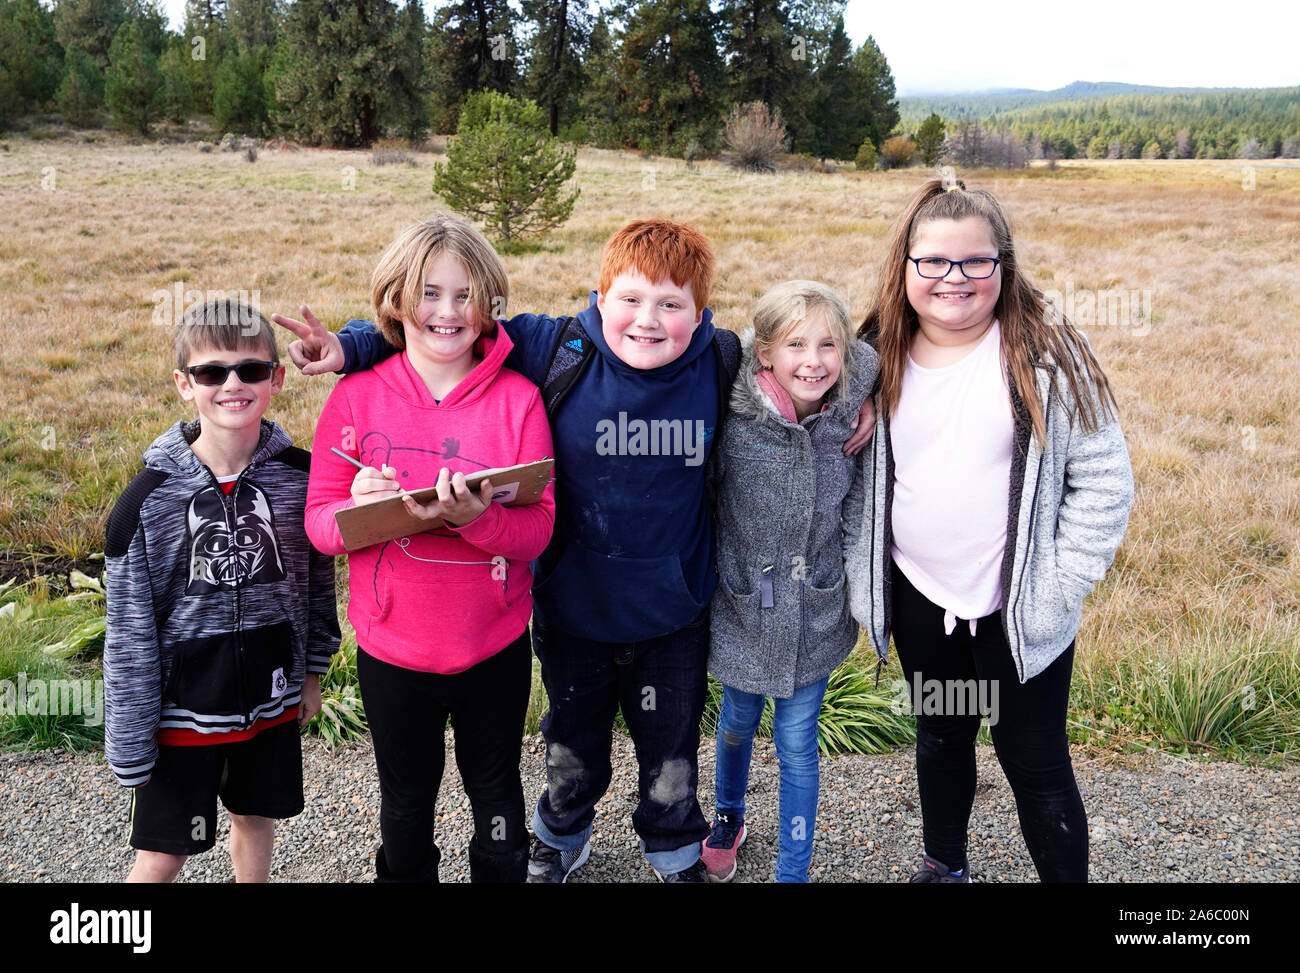 A group of school children on a science field trip along the Deschutes River near Bend, Oregon. Stock Photo